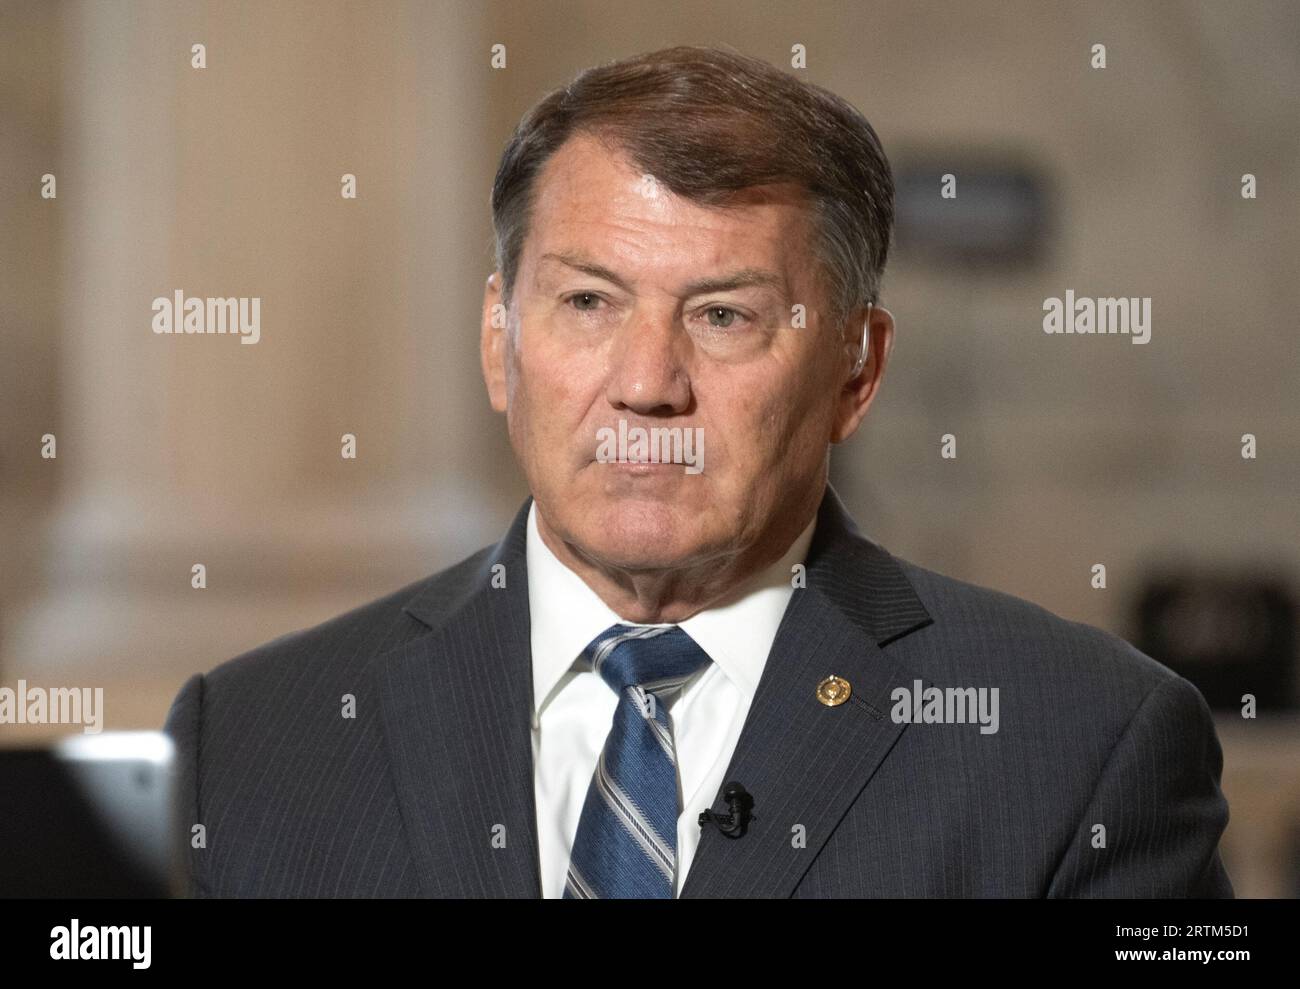 Washington, United States. 13th Sep, 2023. United States Senator Mike Rounds (Republican of South Dakota) is interviewed prior to the US Senate Bipartisan Artificial Intelligence (AI) Forum in the Kennedy Caucus Room on Capitol Hill in Washington, DC, USA, Wednesday, September 13, 2023. Photo by Ron Sachs/CNP/ABACAPRESS.COM Credit: Abaca Press/Alamy Live News Stock Photo